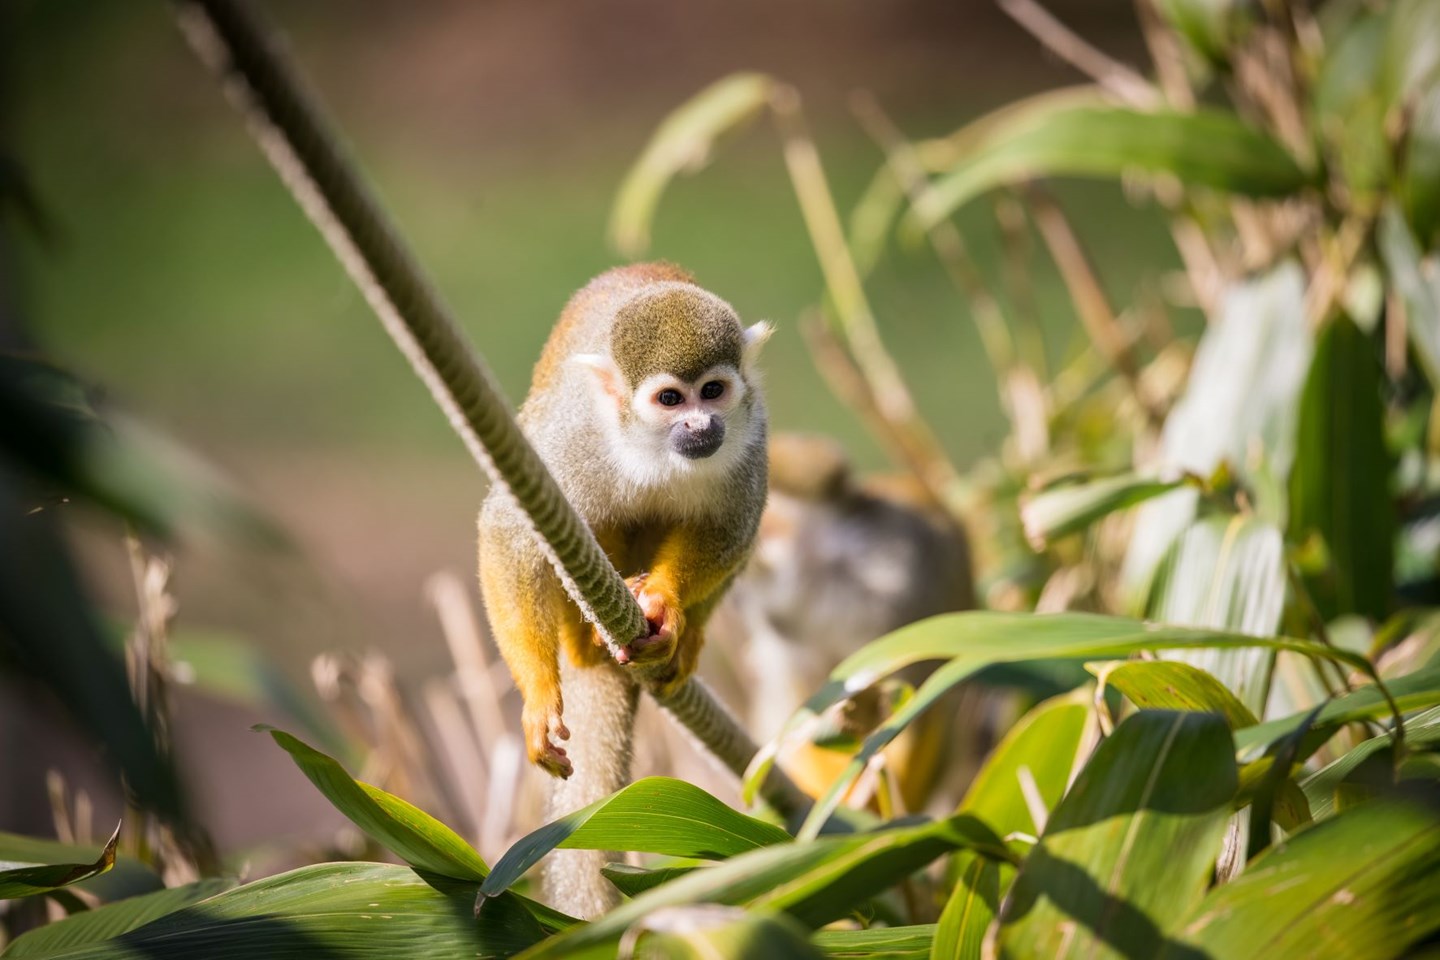 Squirrel Monkey clings to rope among plants